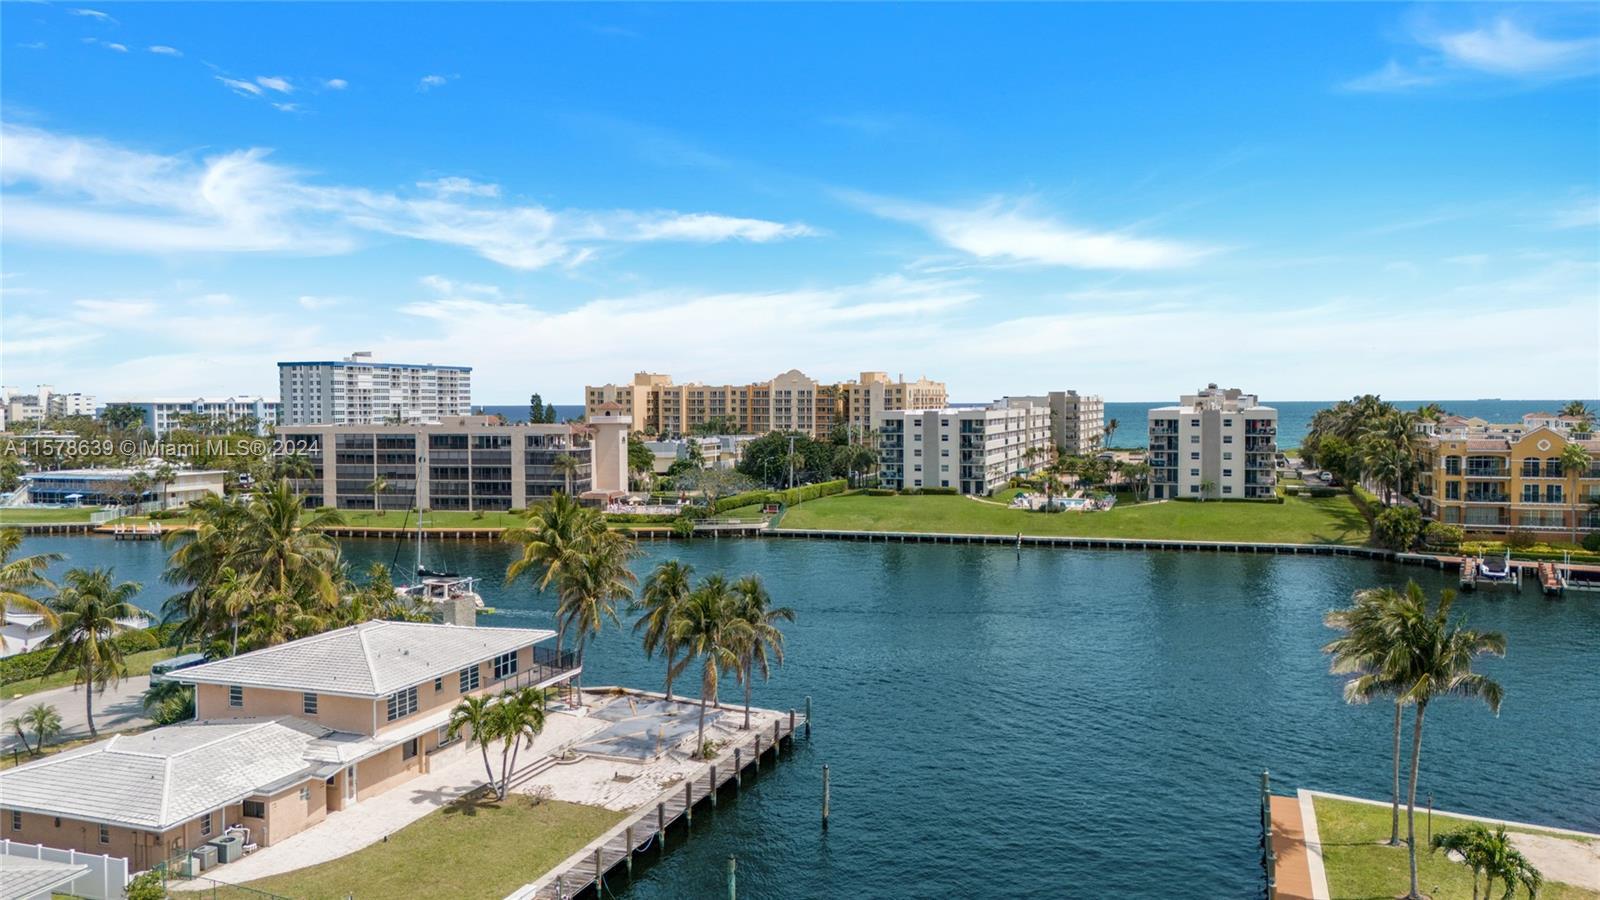 A rare sanctuary in Deerfield Beach offering both seclusion and access to a vibrant coastal lifestyl